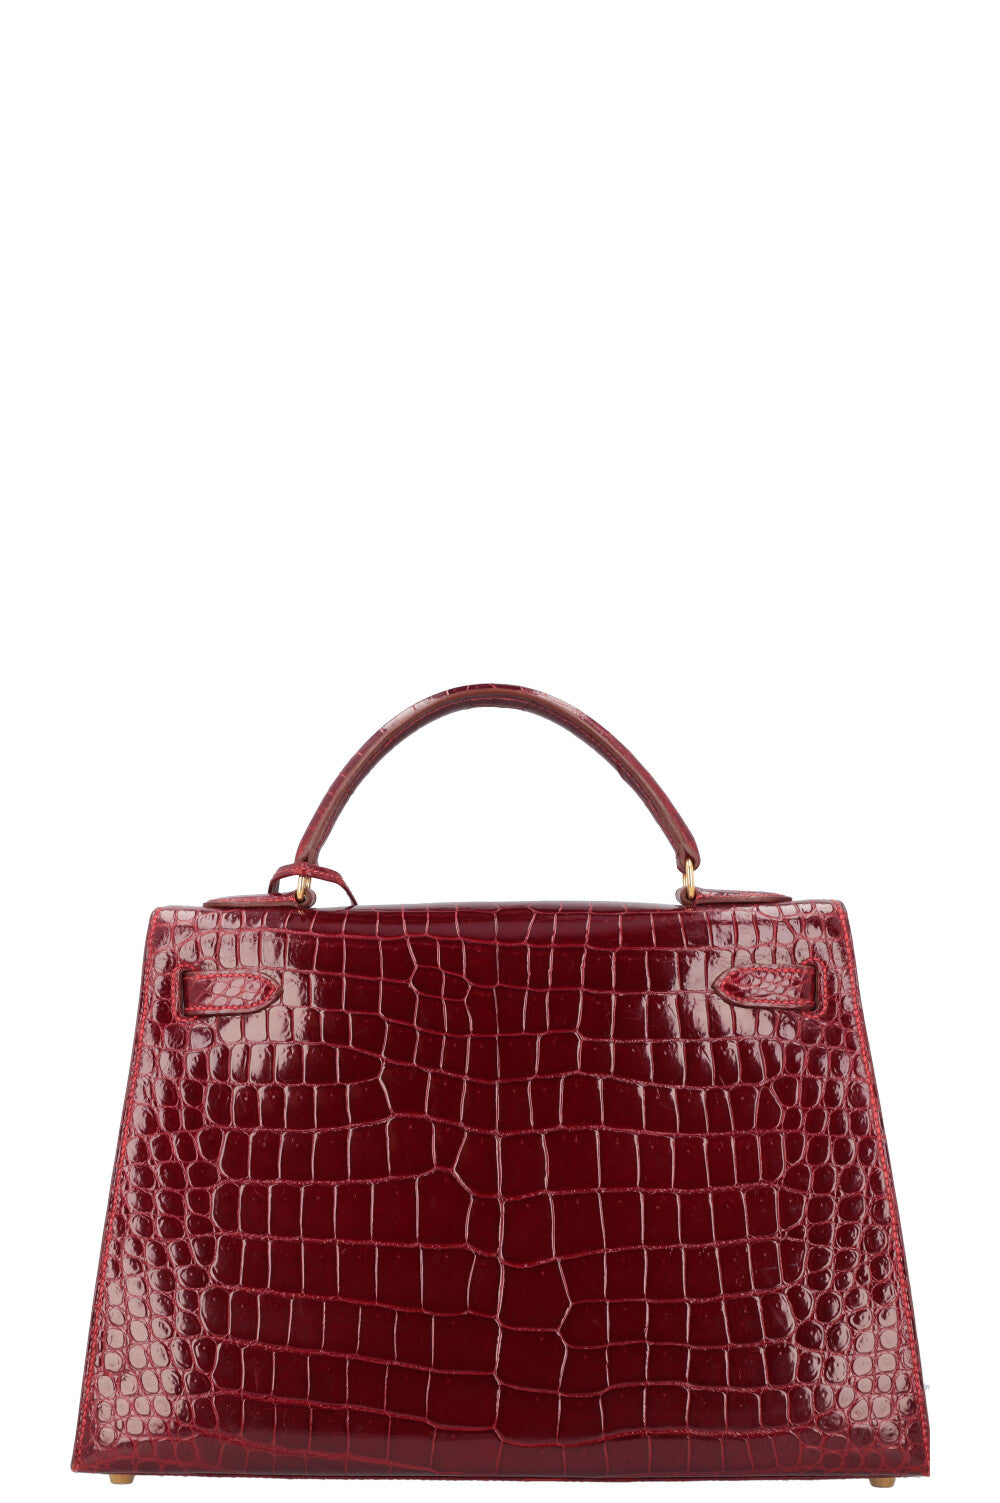 HERMÈS Kelly Sellier 32 Shiny Alligator Mississippiensis Rouge